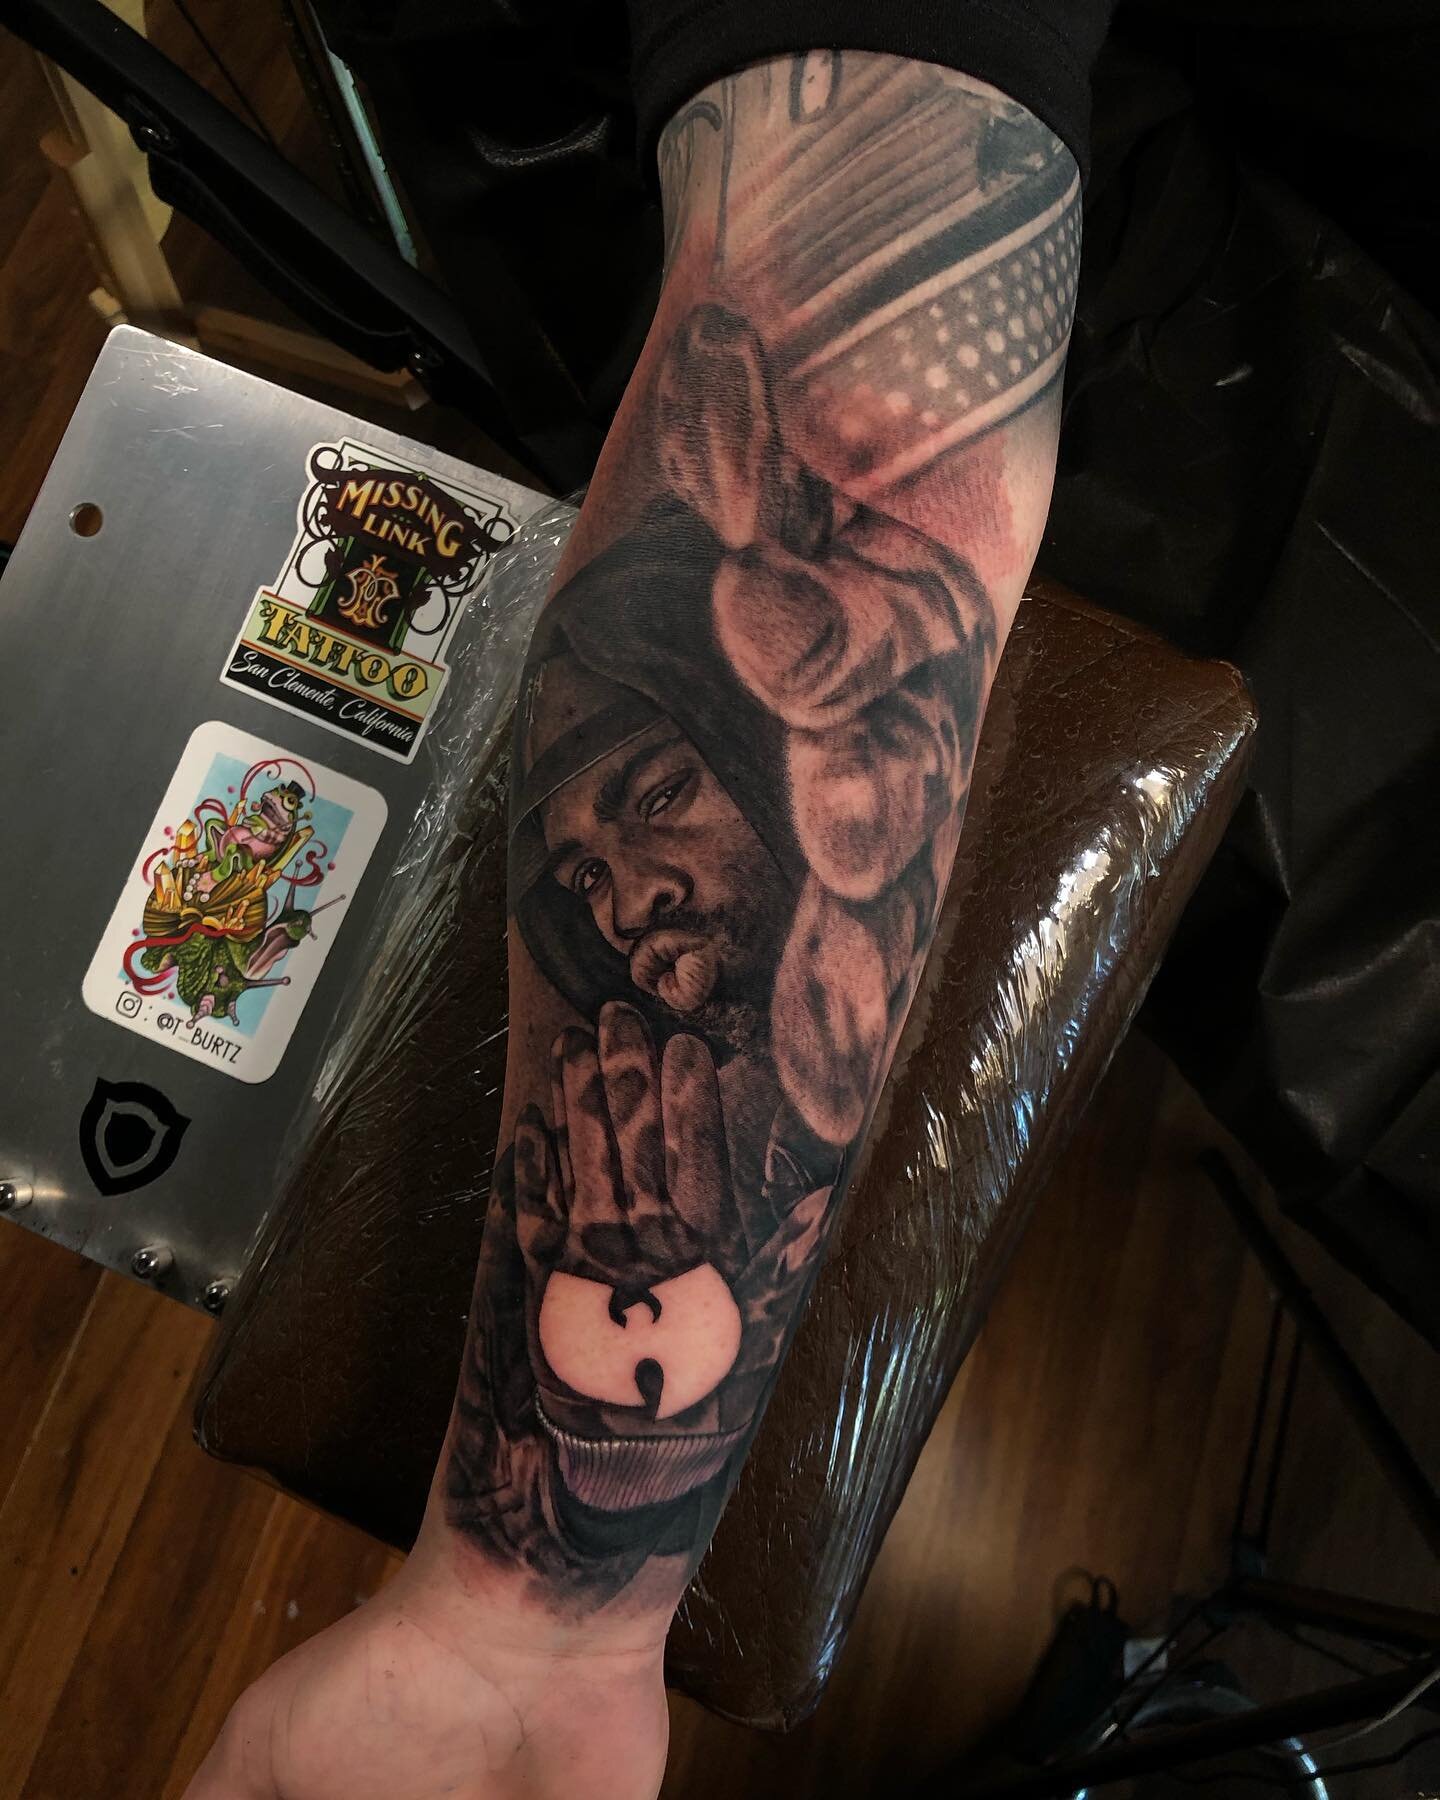 Did Meth the other day! Portrait of a karate choppin&rsquo; @methodmanofficial for my dude, Mike. Thanks again man! Looking forward to finishing this @wutangclan arm up 👊🏼
&bull;
To book an appointment, hit the link in my bio 🎉 or email me directl